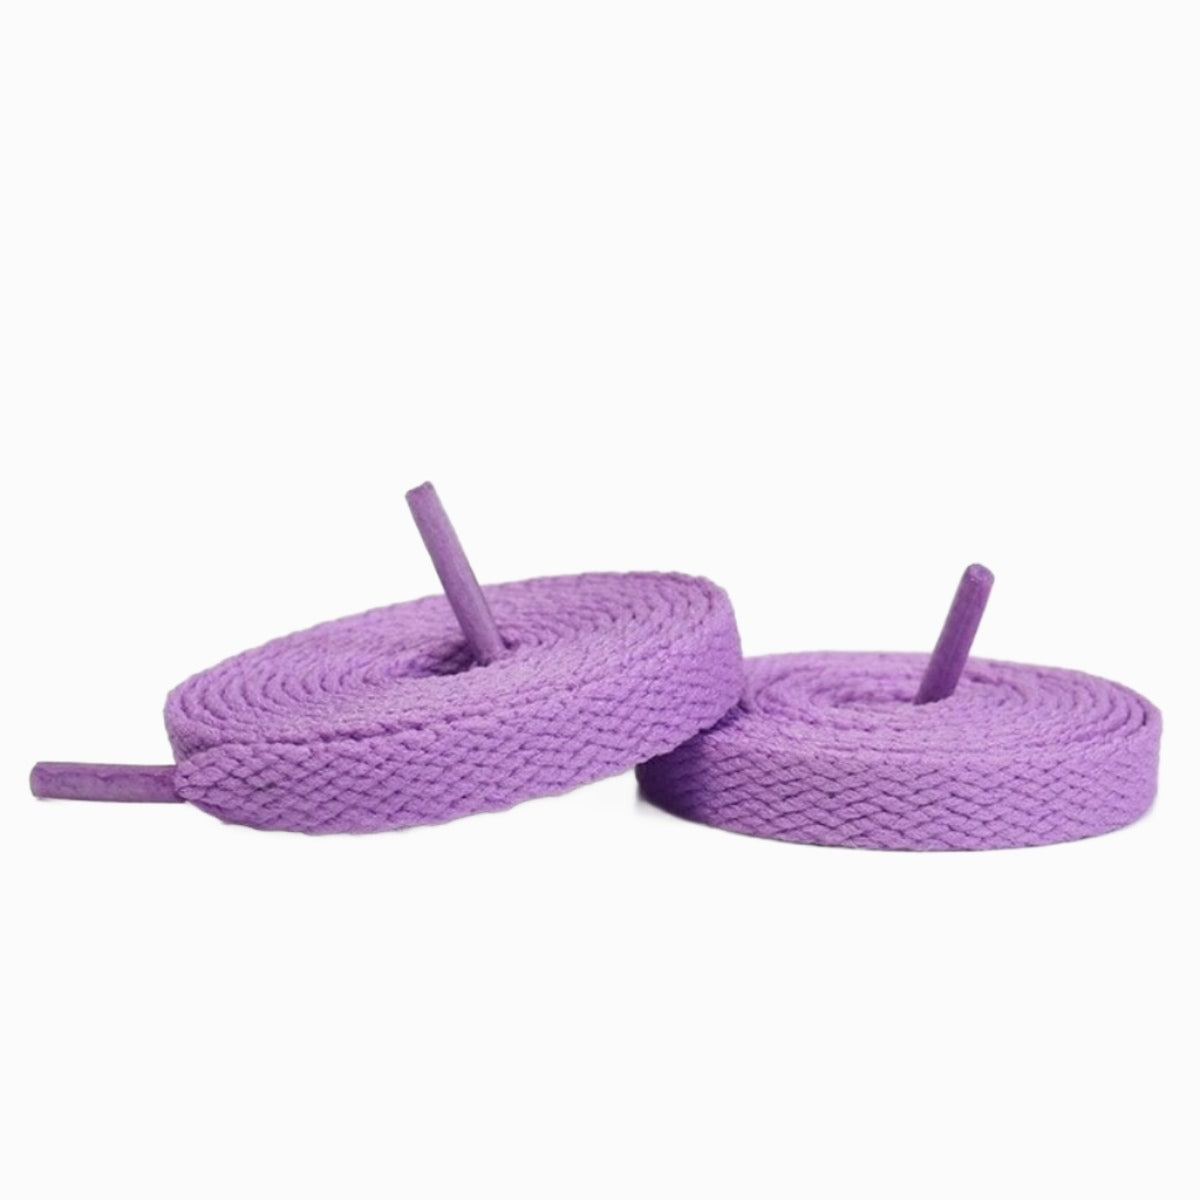 purple-fun-shoelaces-suitable-for-tying shoelaces-on-popular-sneakers